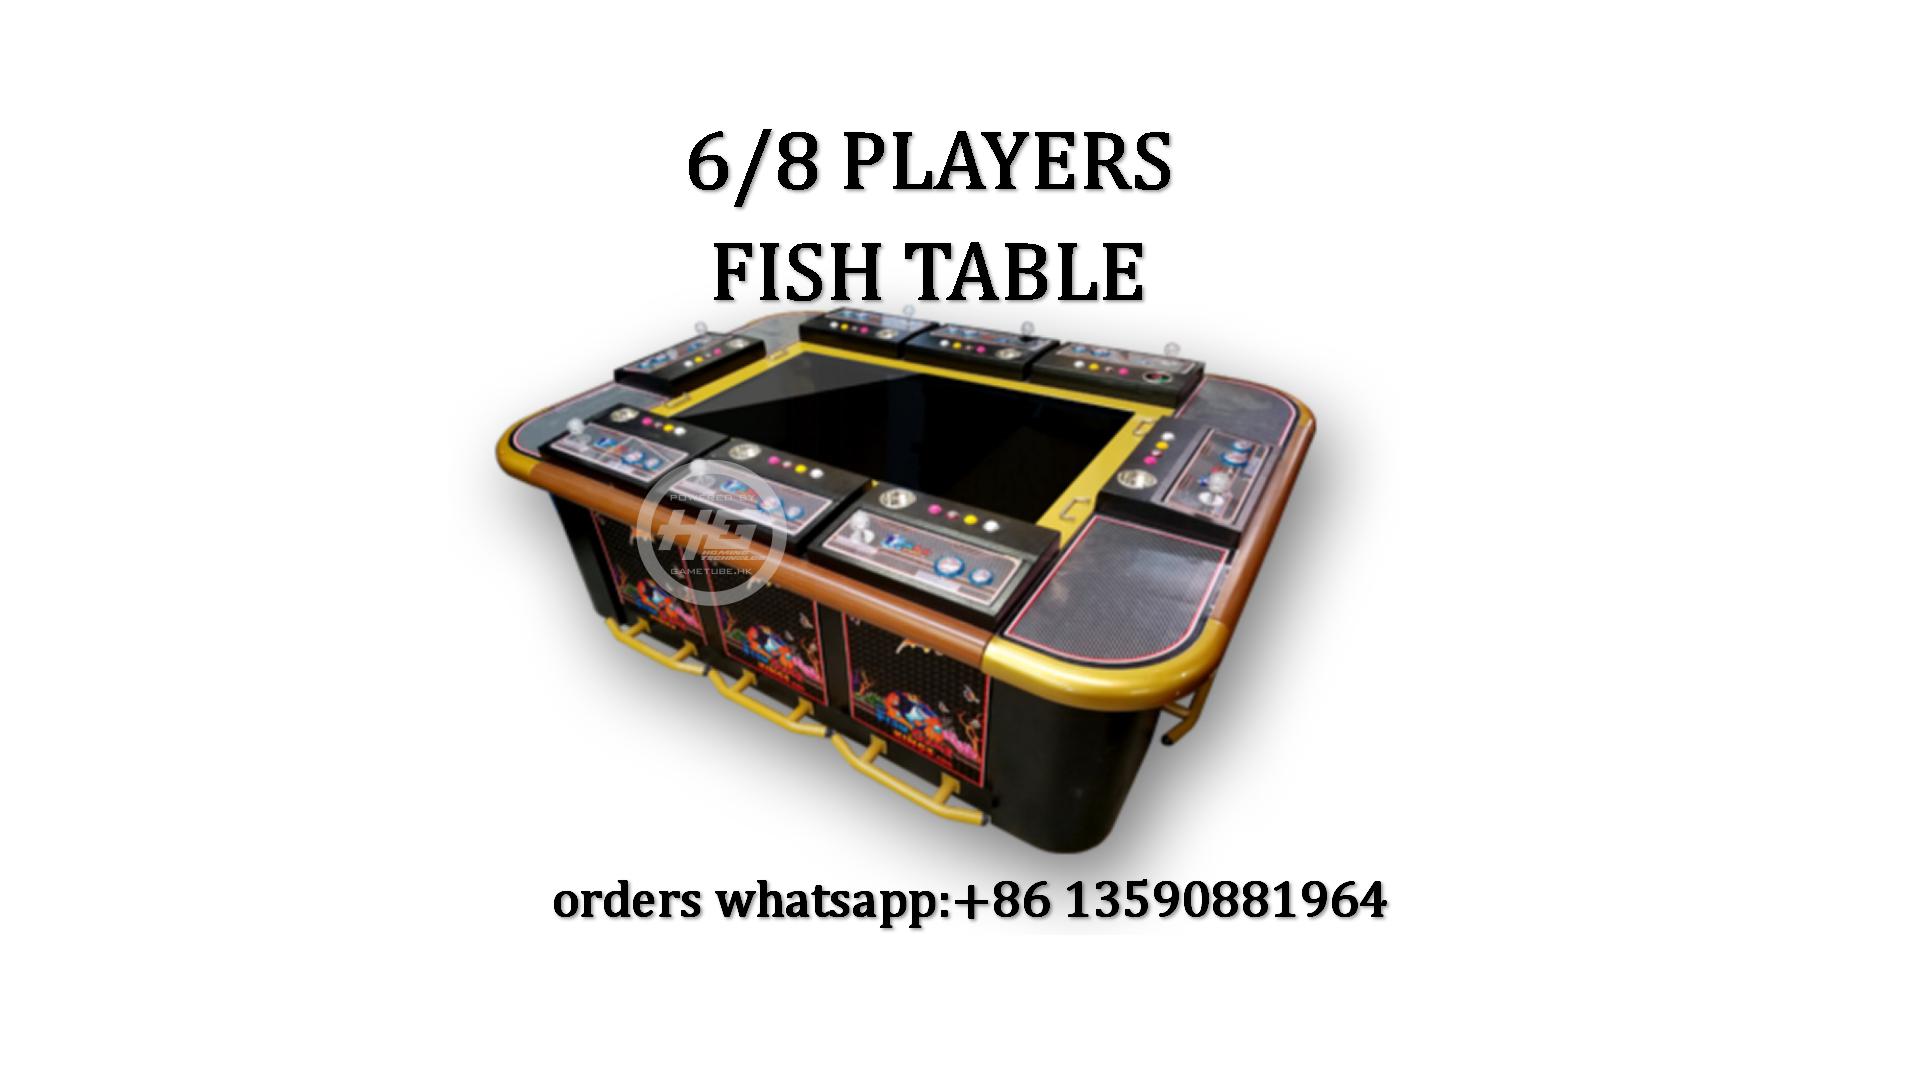 Luxury 6/8 Players Fishing Game Machine,Fish Table Game,Ocean King 3 Plus Fishing Game For Sale